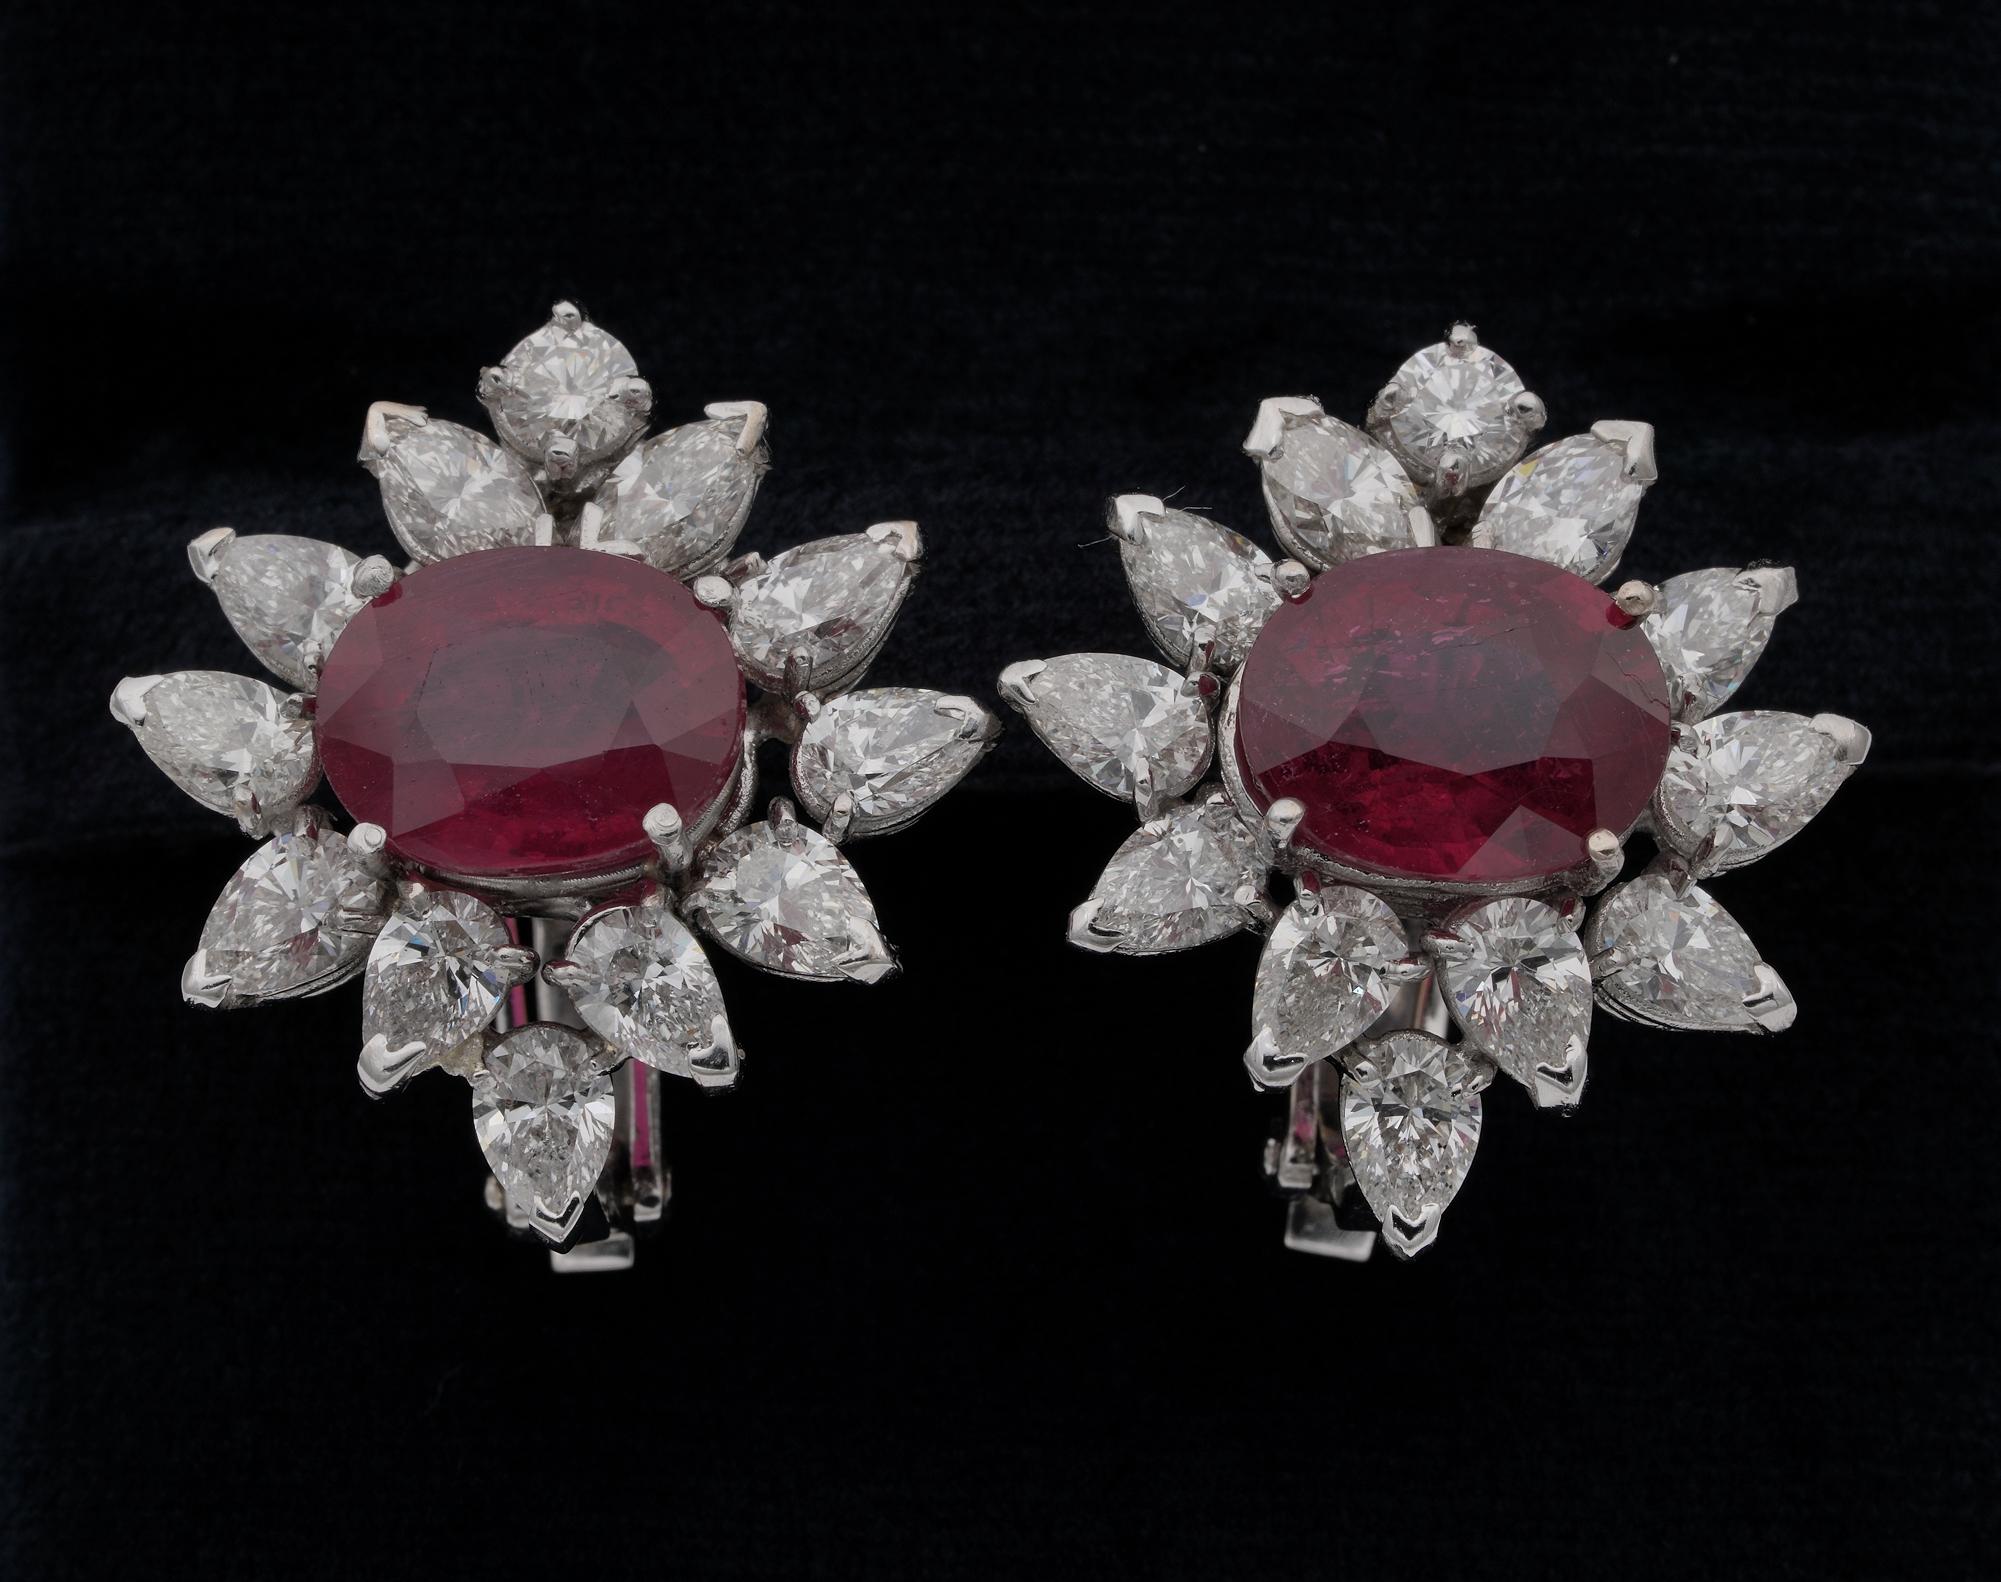 This superb pair of Vintage earrings are 1950 ca.
They express all the timeless glam of that era in a skilfully hand workmanship rendered of solid 18 Kt white gold
Marked with assay and maker punch
Designed in a cluster of natural Red Rubies and